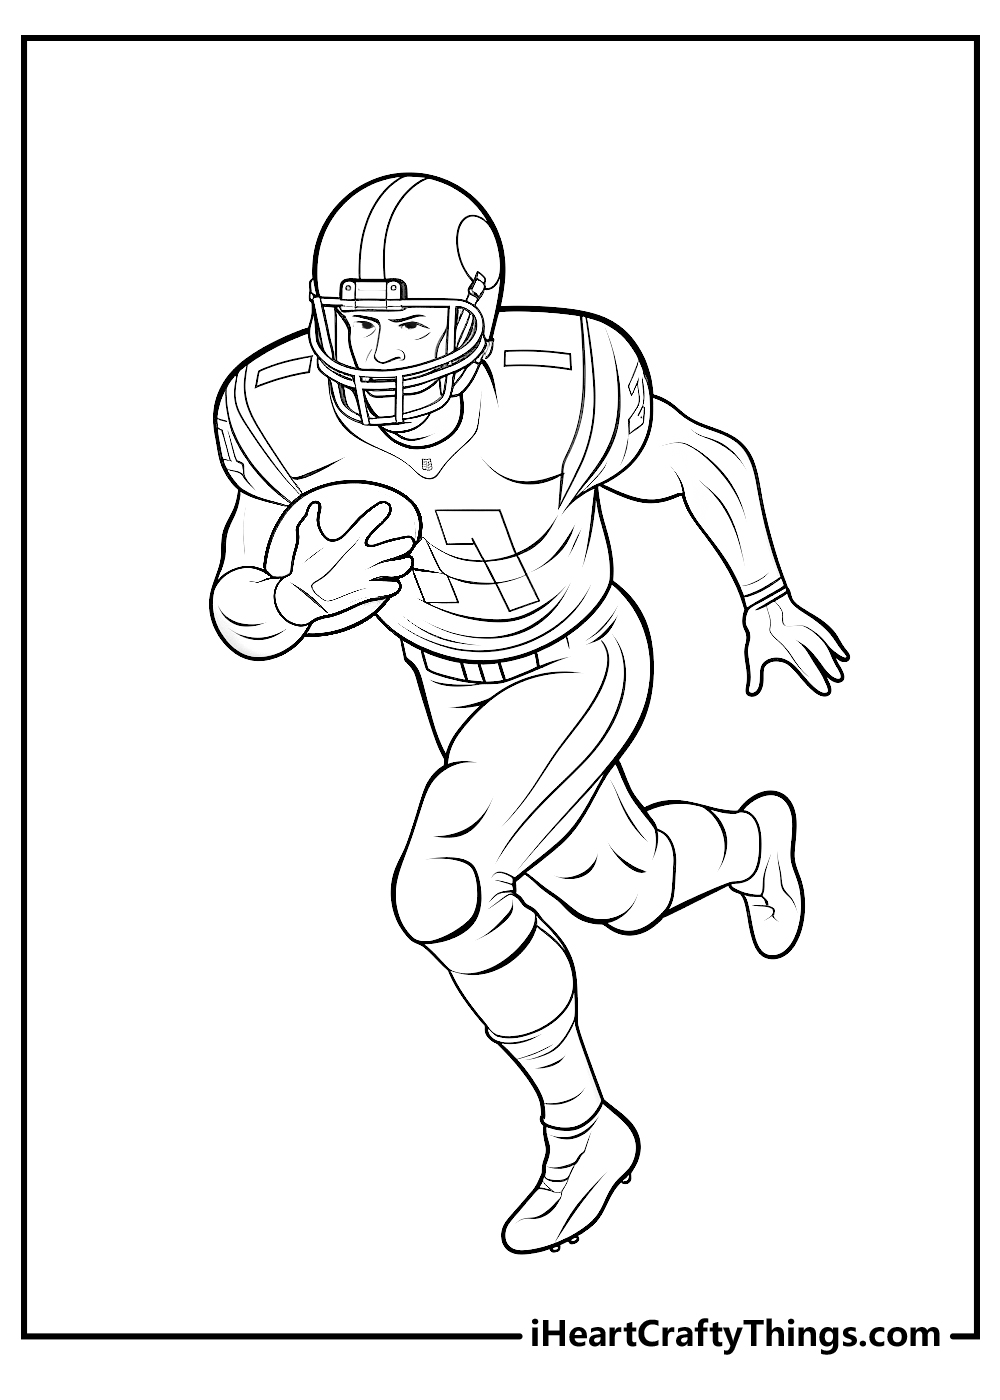 NFL coloring printable for adults